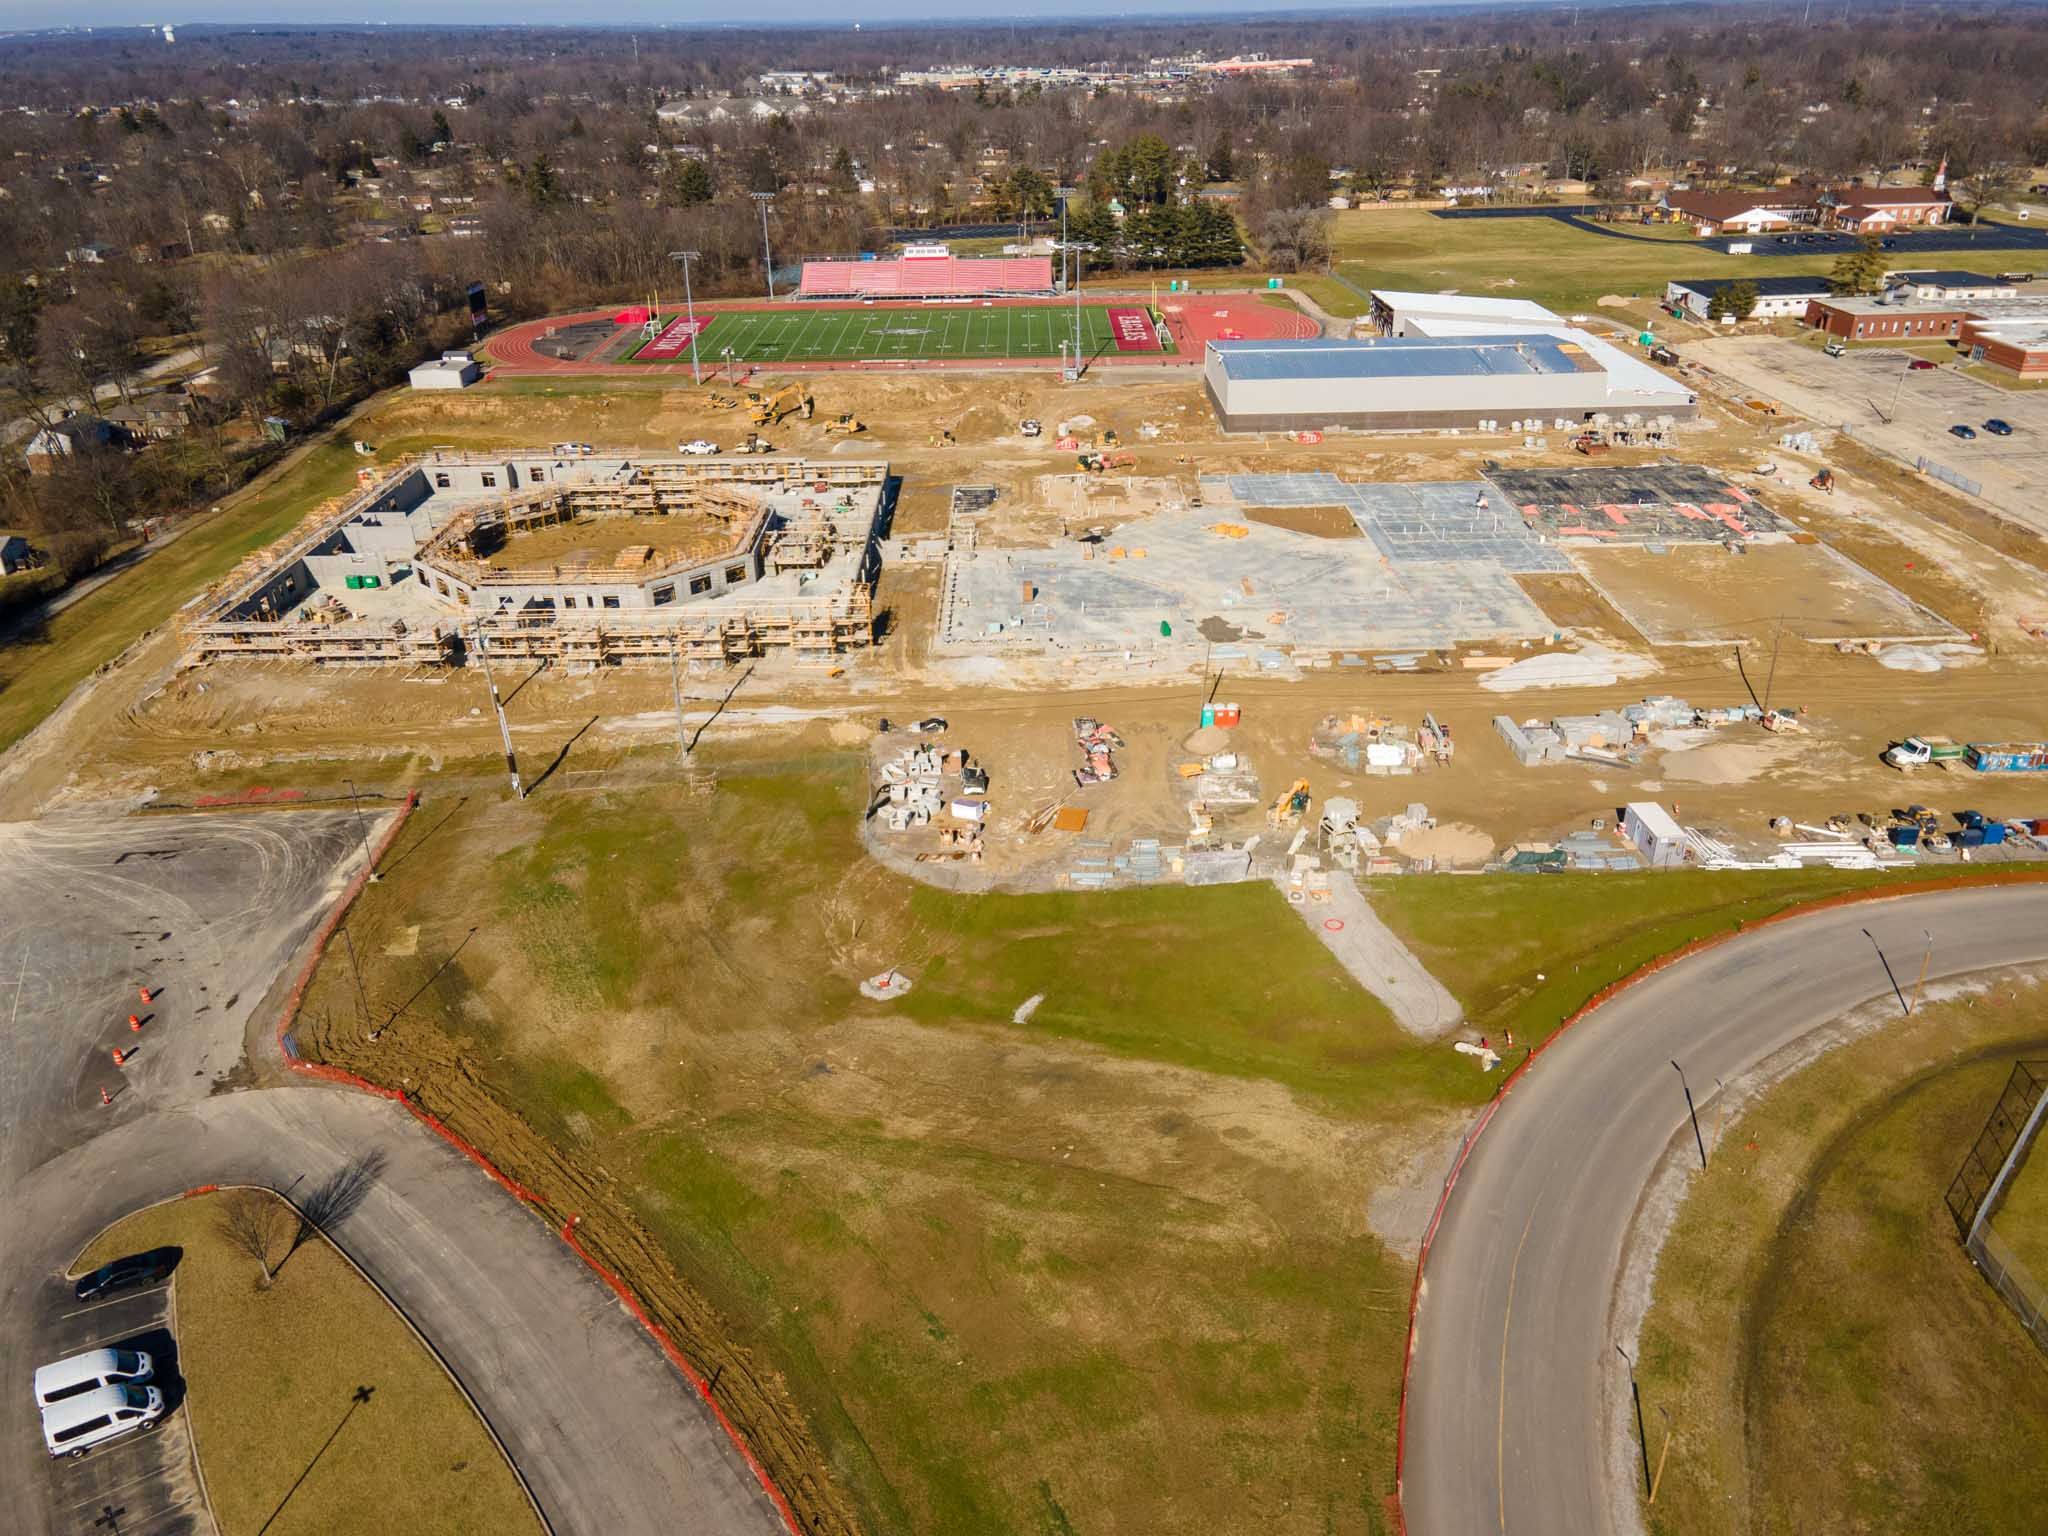 Construction updates for the week of June 7, 2021: Progress on ongoing projects and new developments.